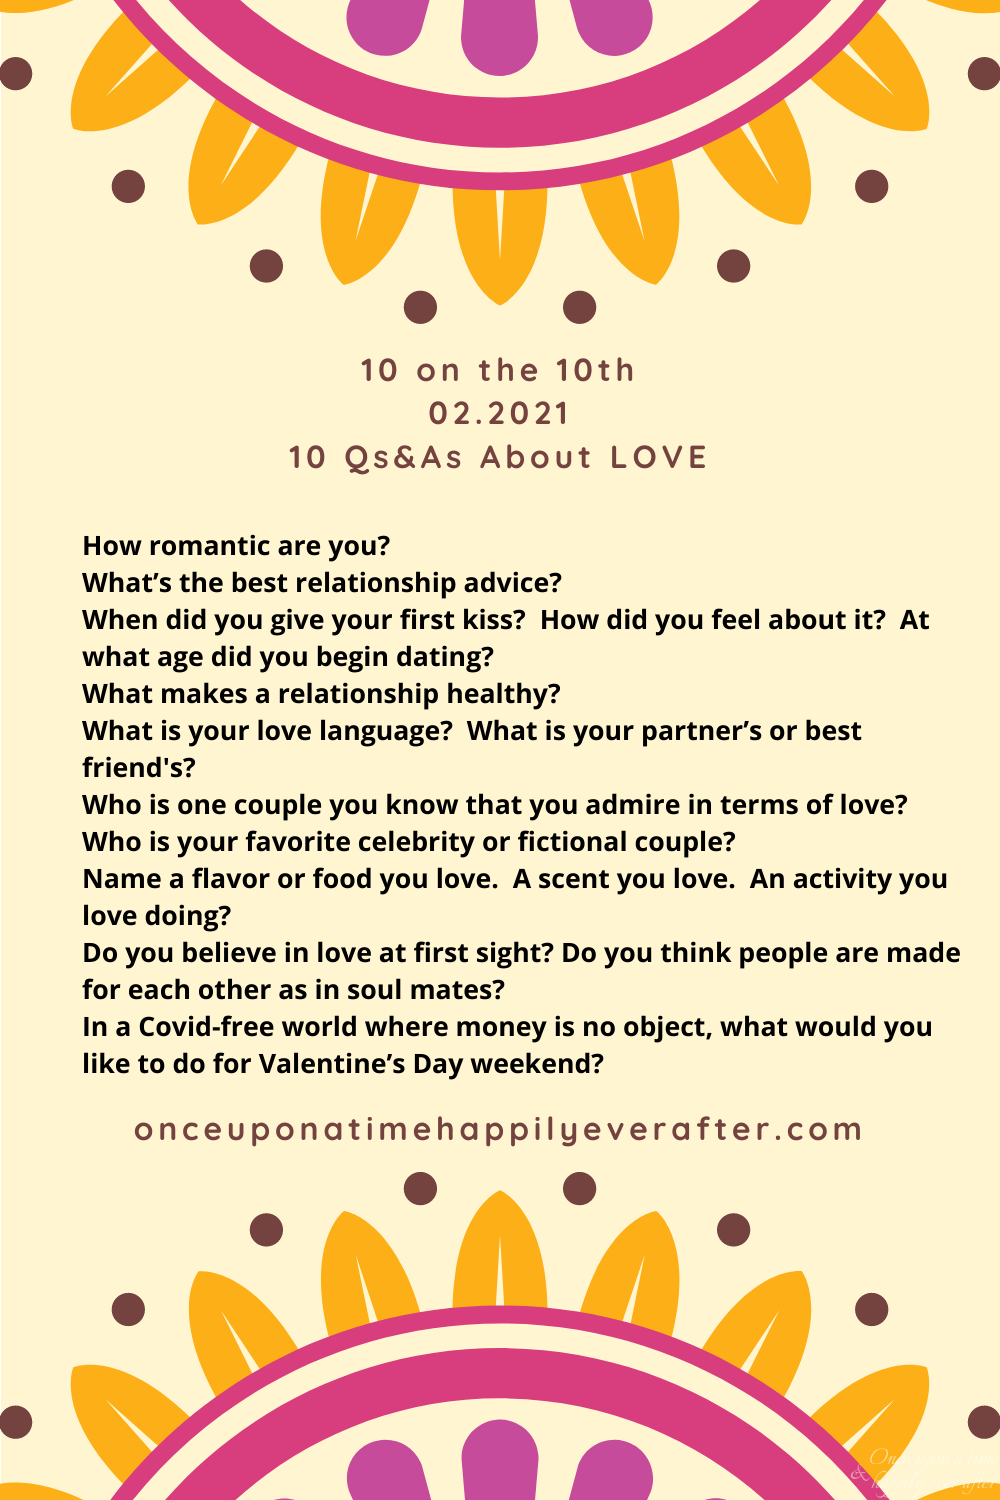 10 Questions about Love